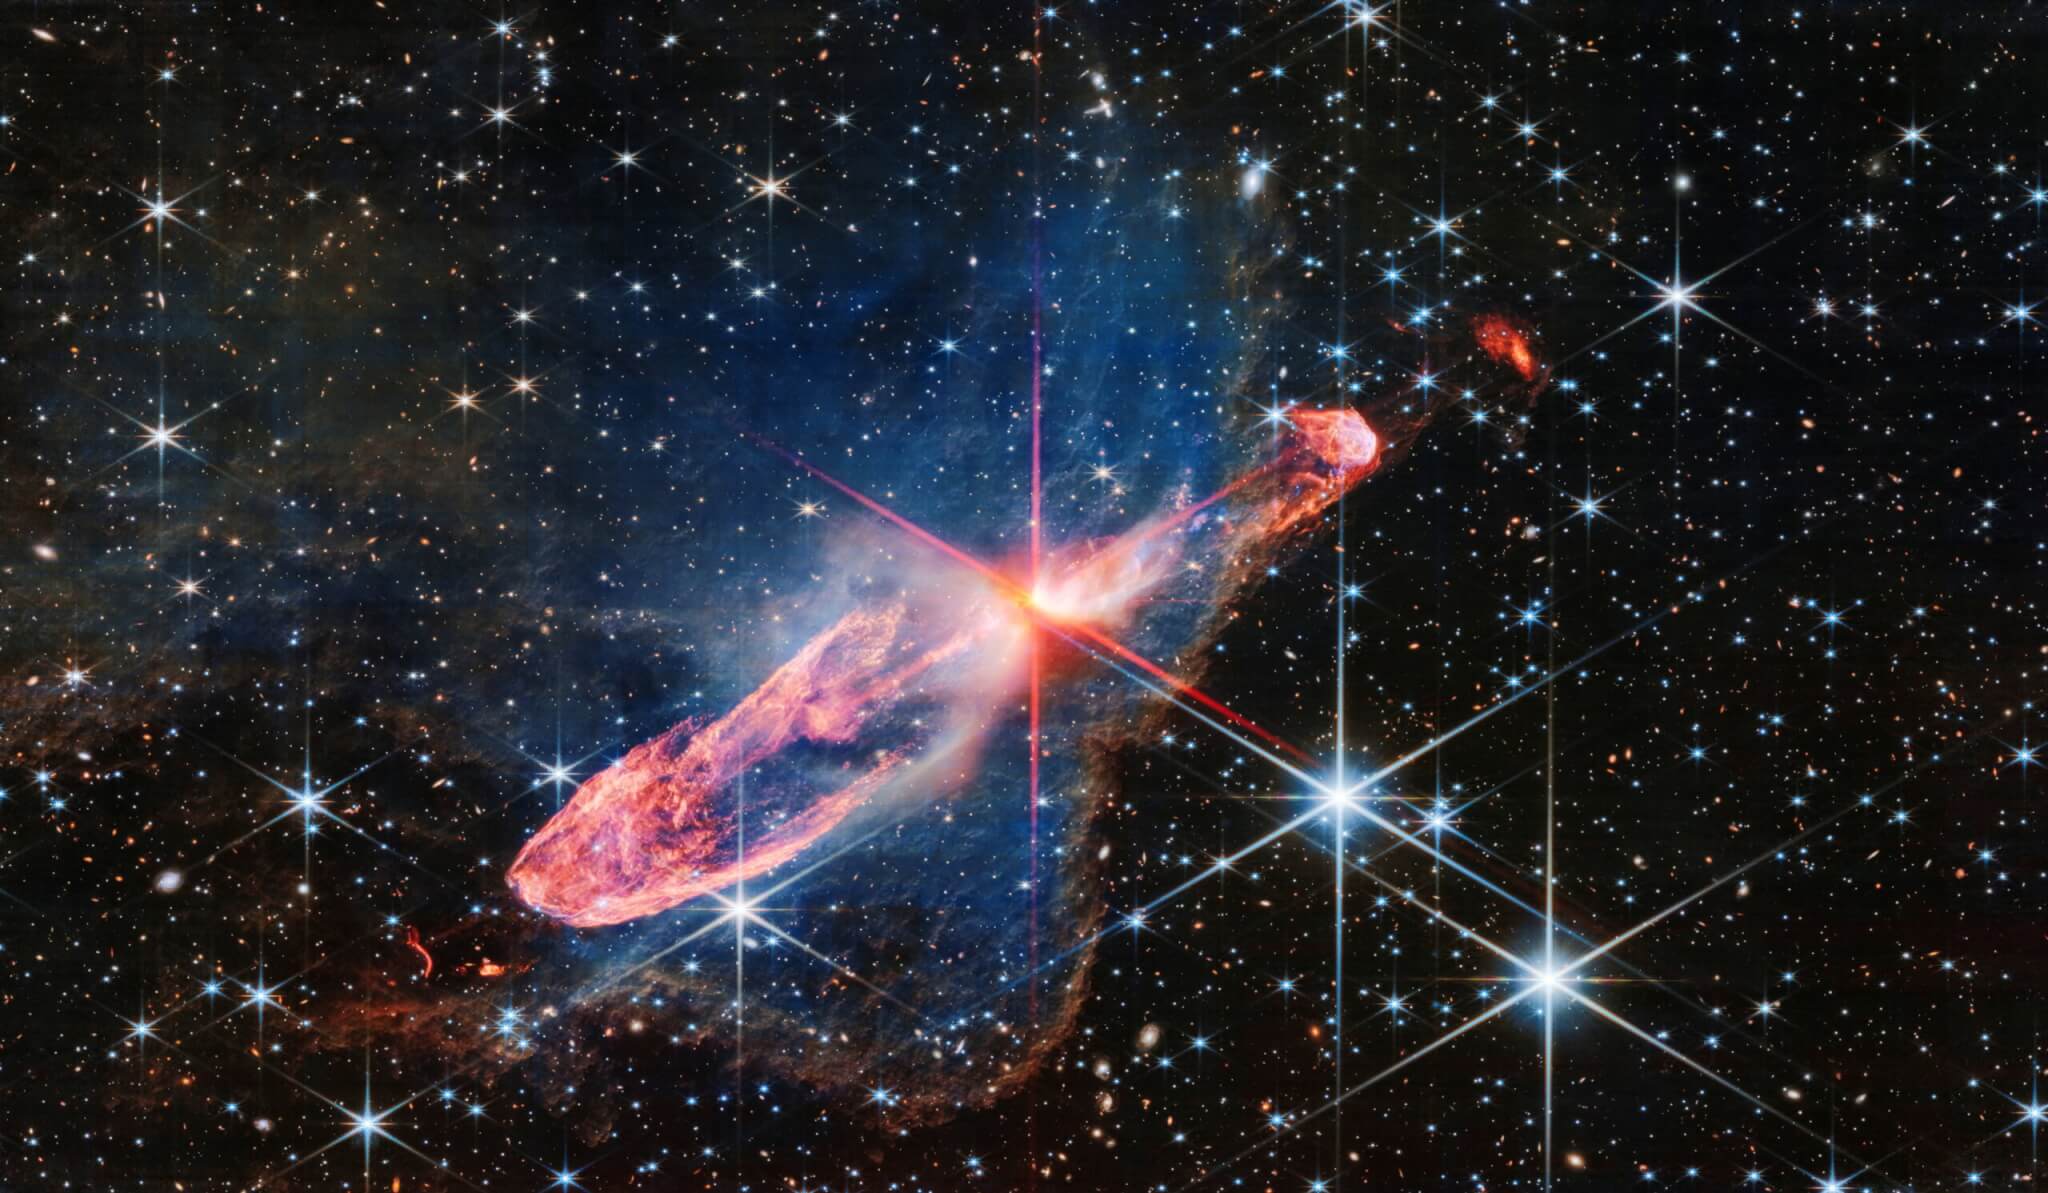 tightly bound pair of actively forming stars, known as Herbig-Haro 46/47